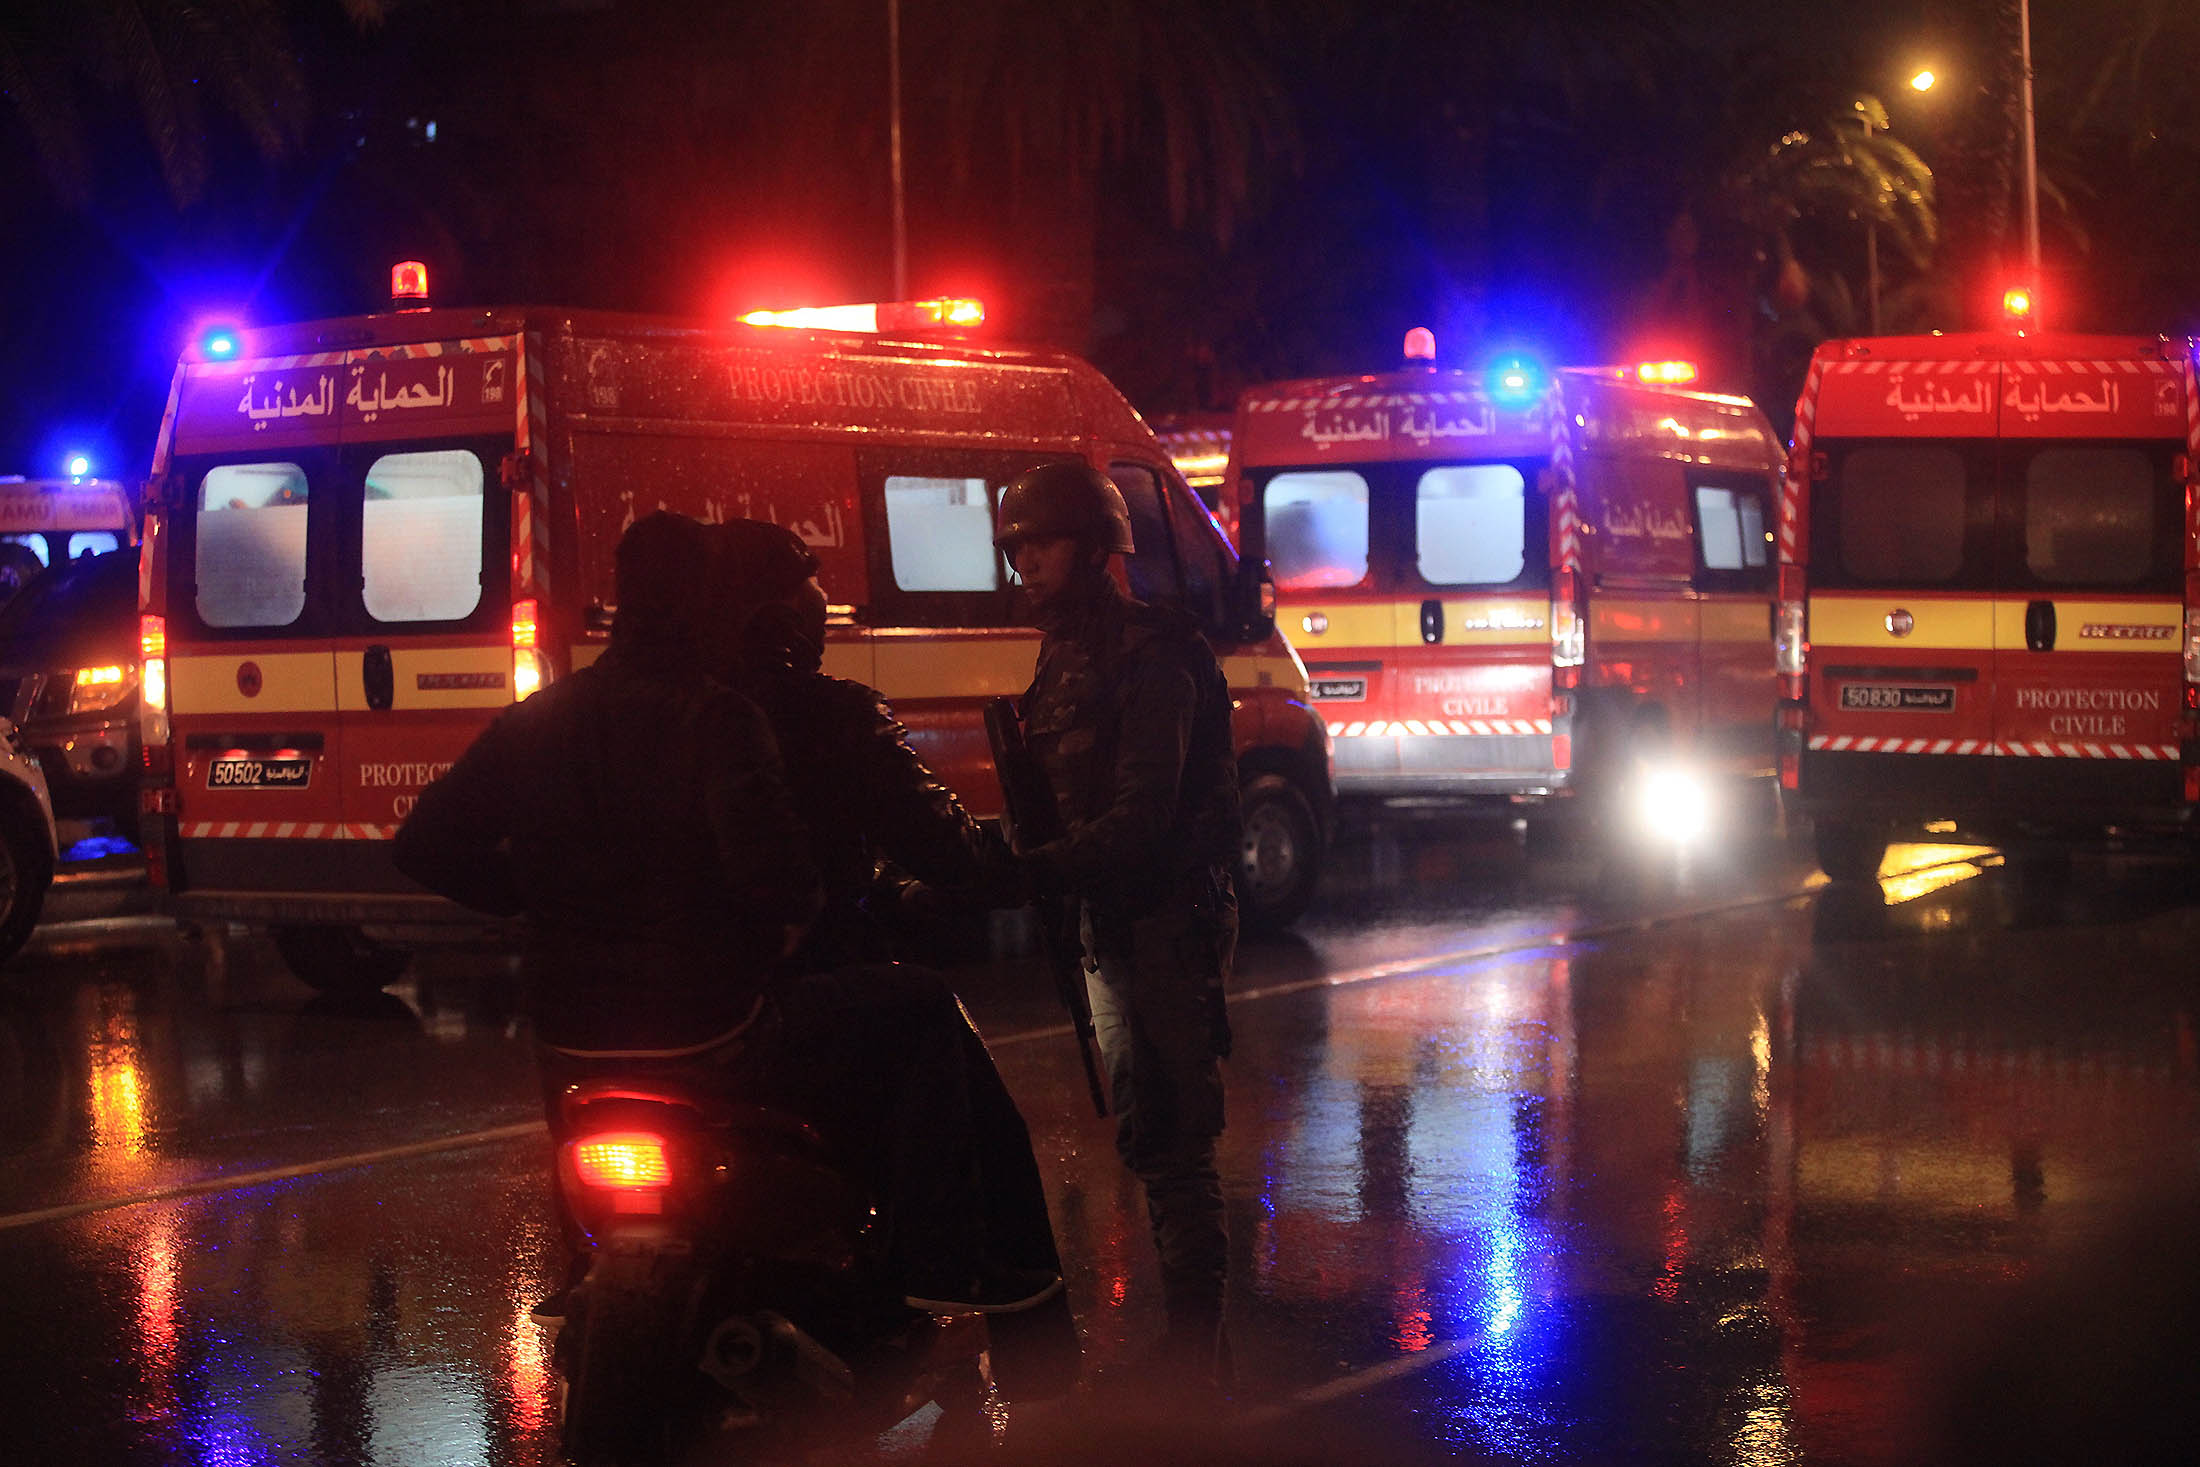 Ambulances are seen after an explosion in Tunis. Photographer: Yassine Gaidi /Anadolu Agency/Getty Images
